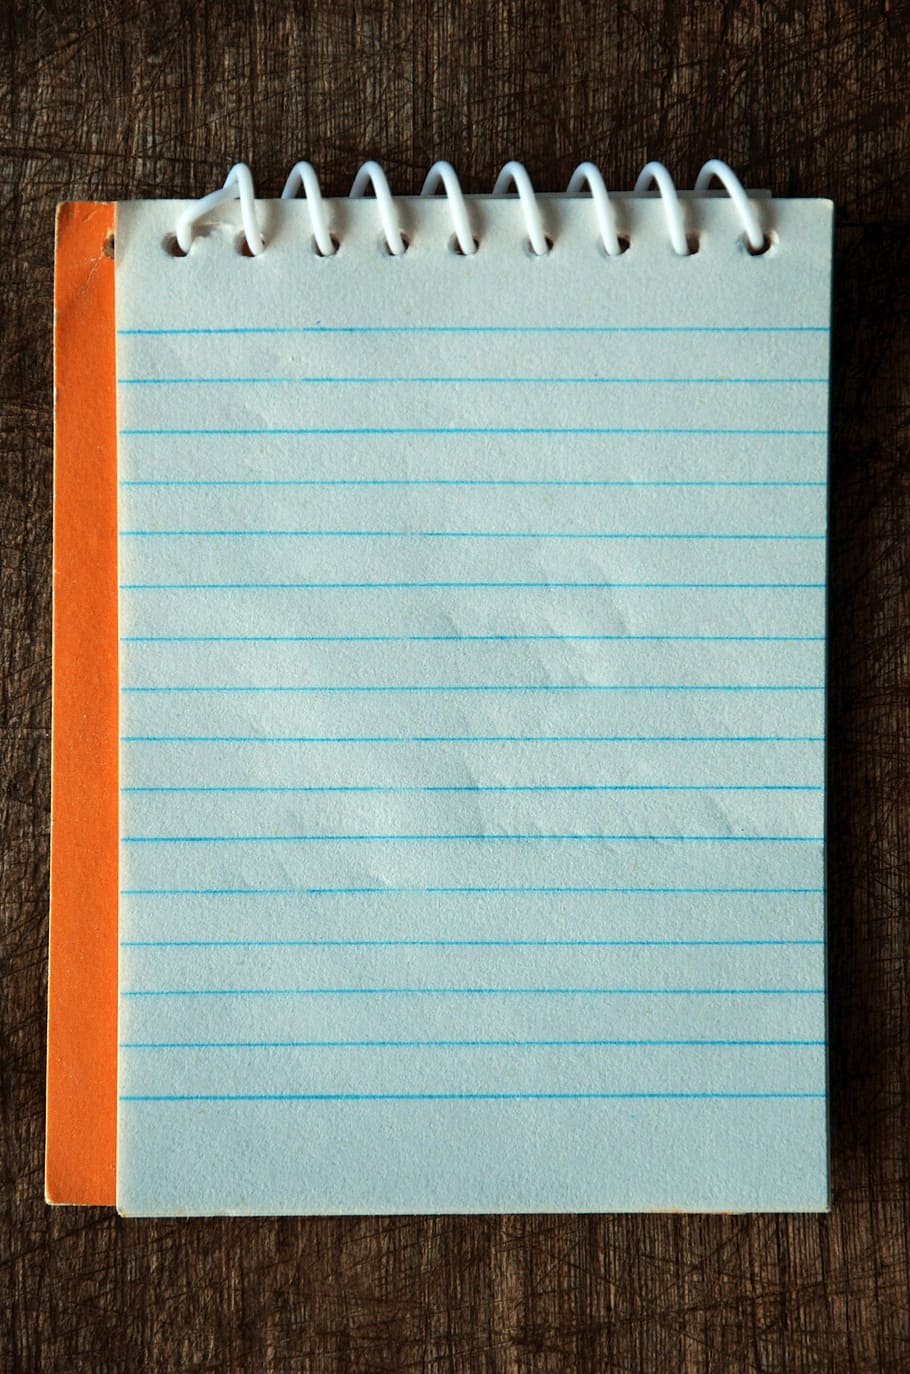 white, teal line sprint notebook, table, sprint, notebook, vintage, orange, blue lines, paper, wire-o